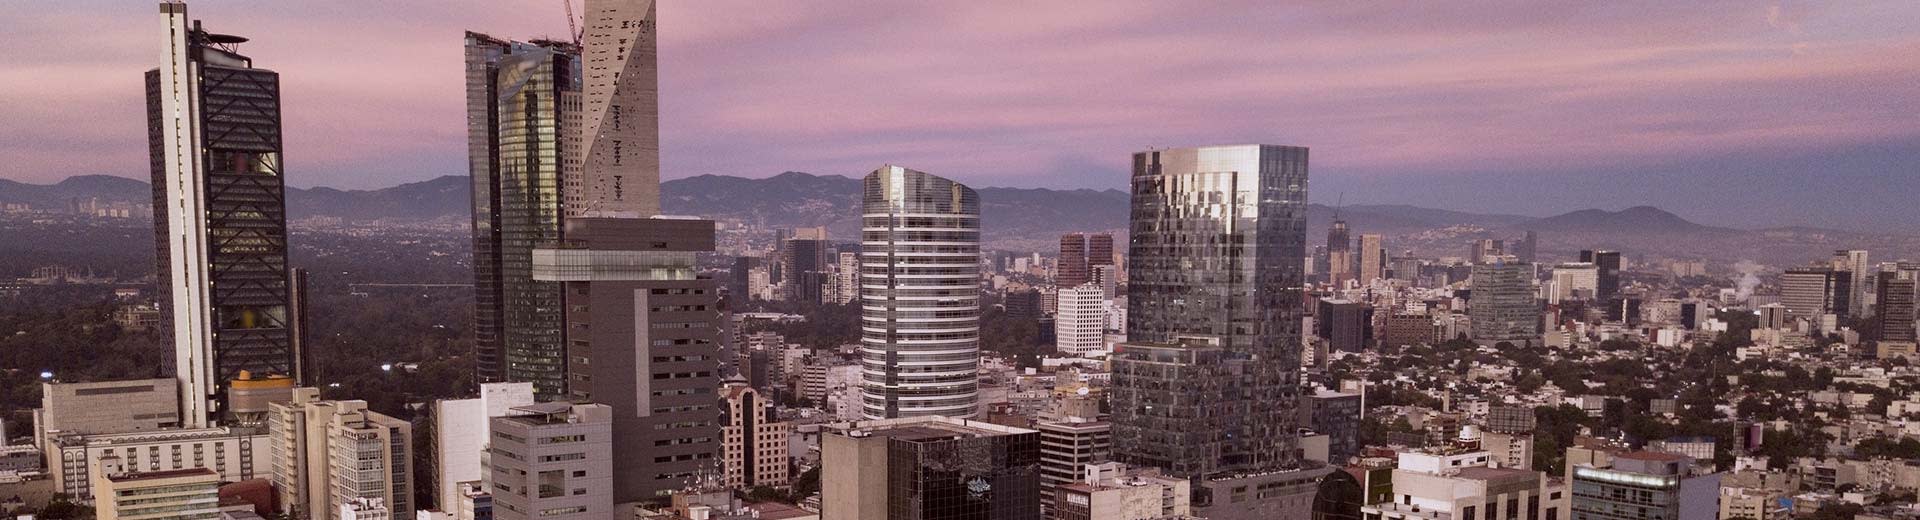 Skyscrapers in the foreground while Mexico City sprawls behind them, with the purple light of dusk or dawn in the background.